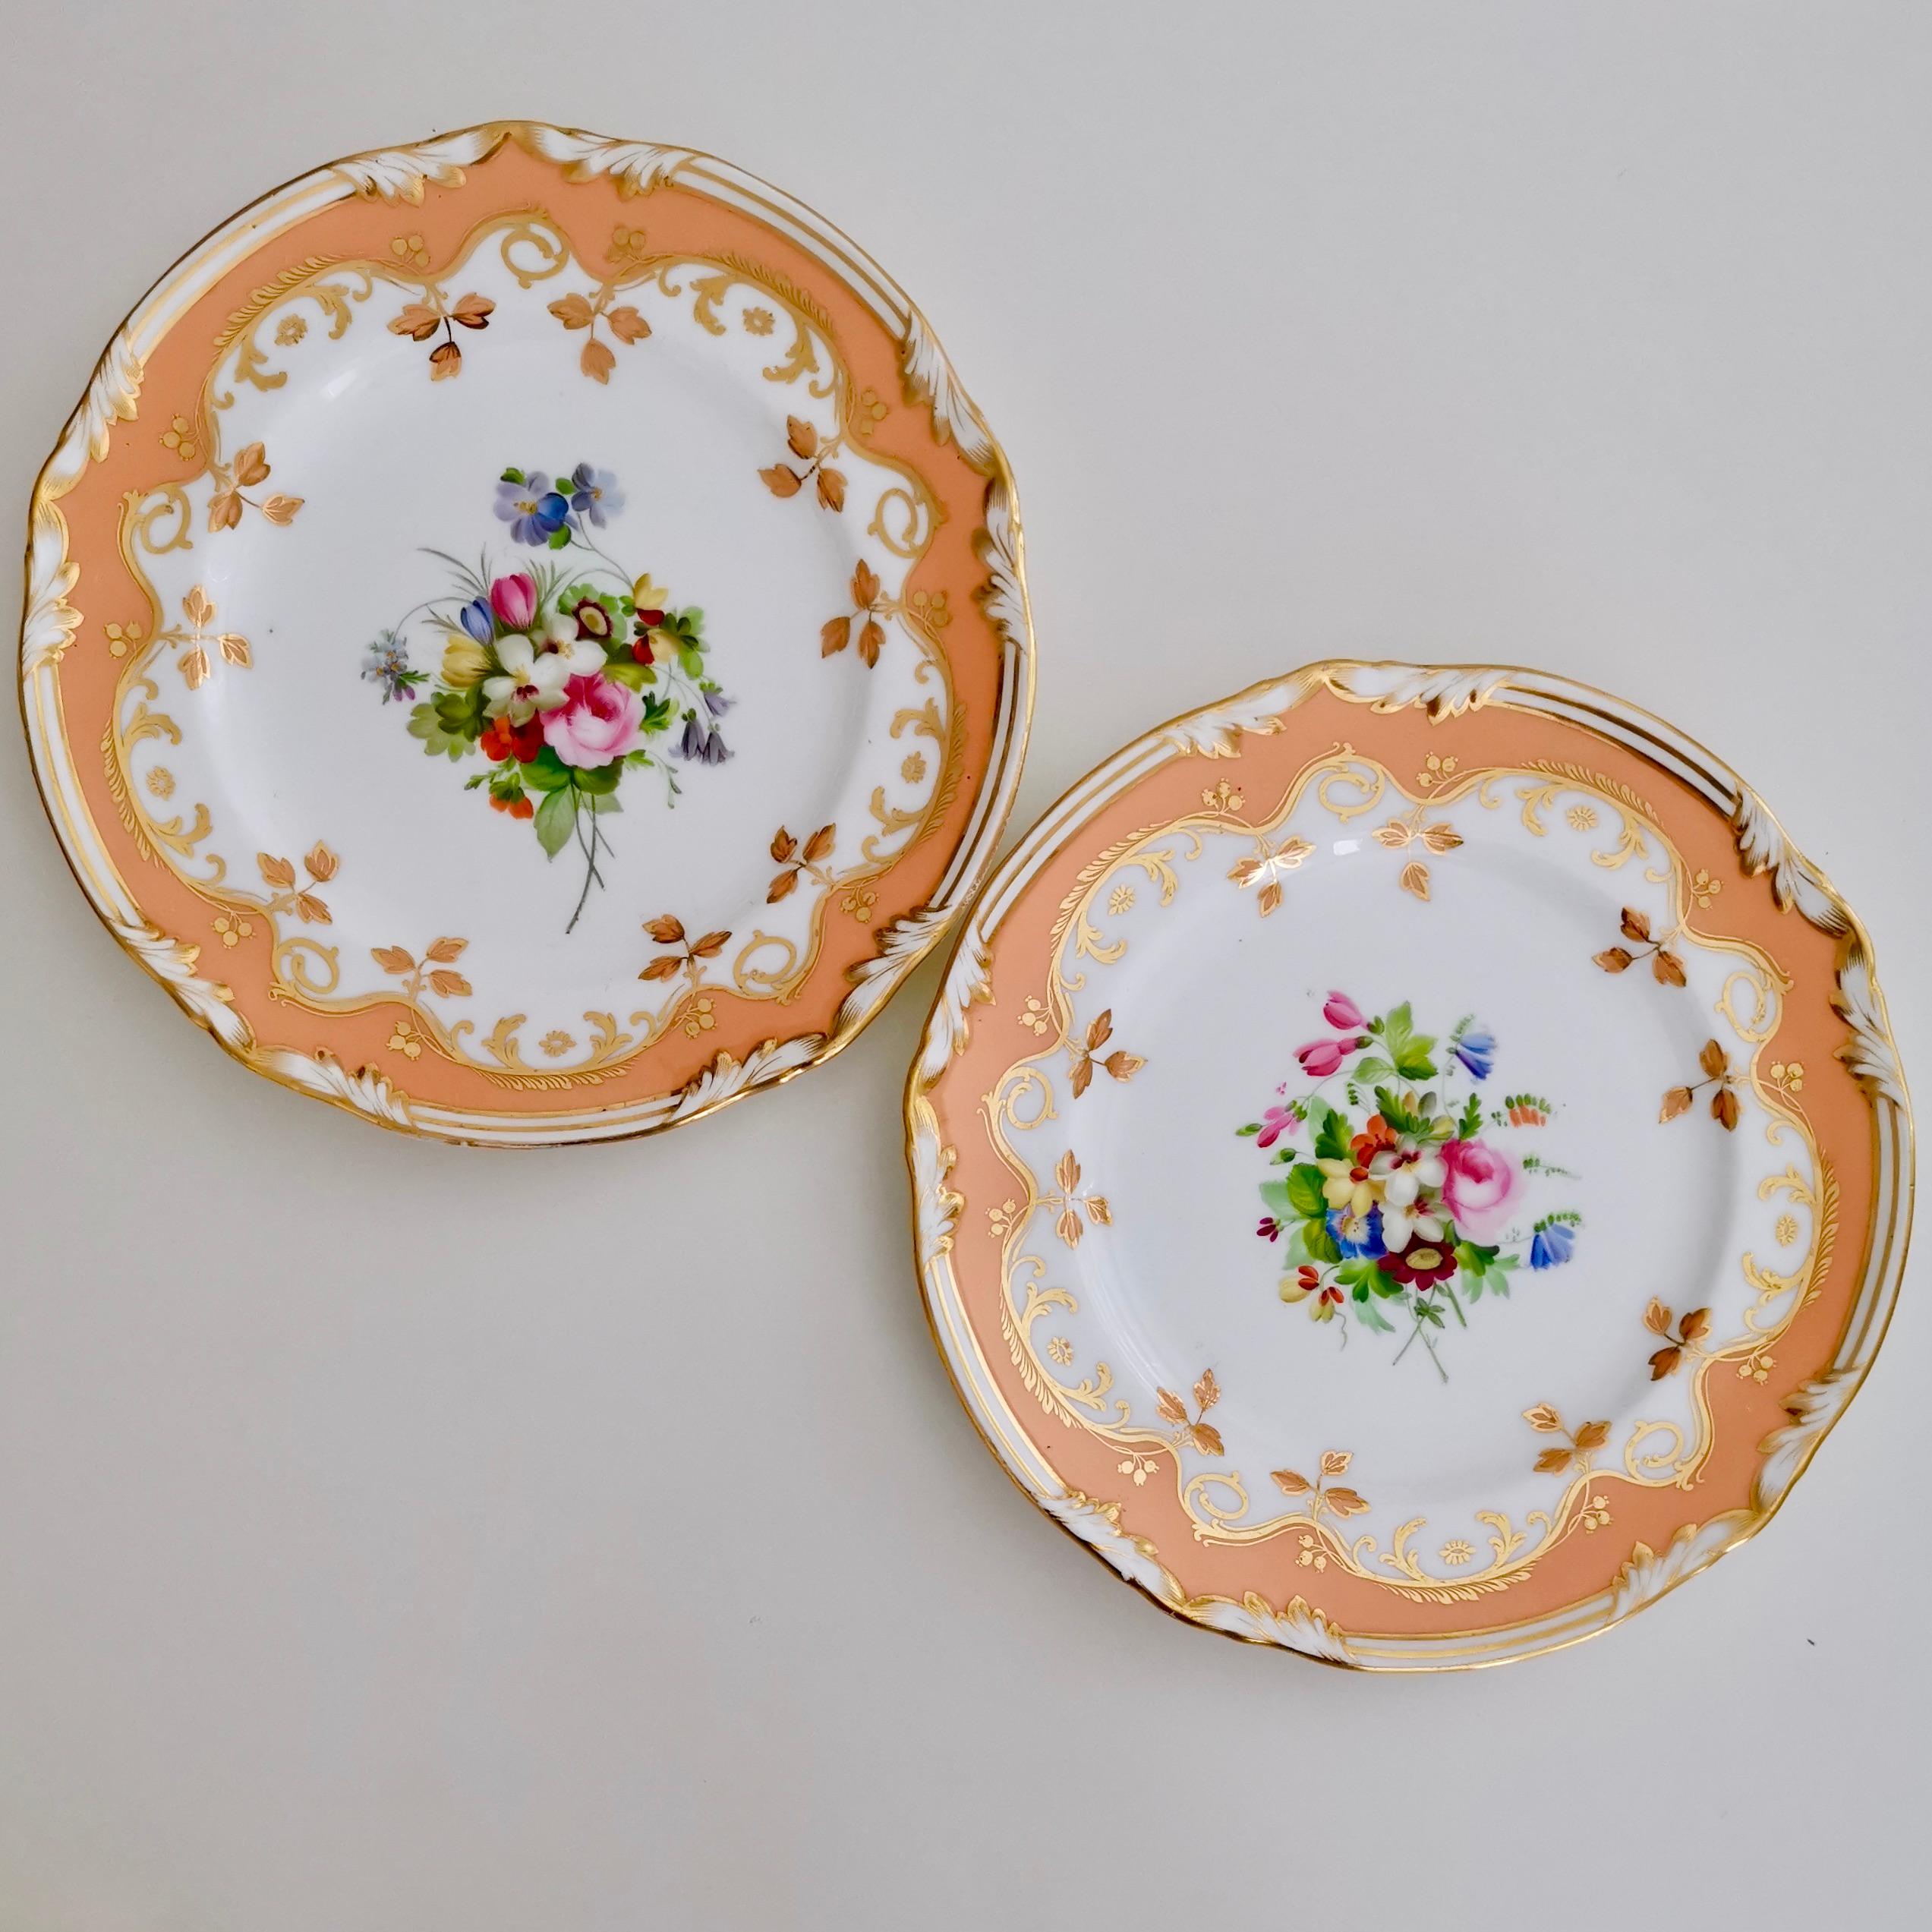 Coalport Porcelain Plate, Peach Ground and Flowers by Thomas Dixon 1